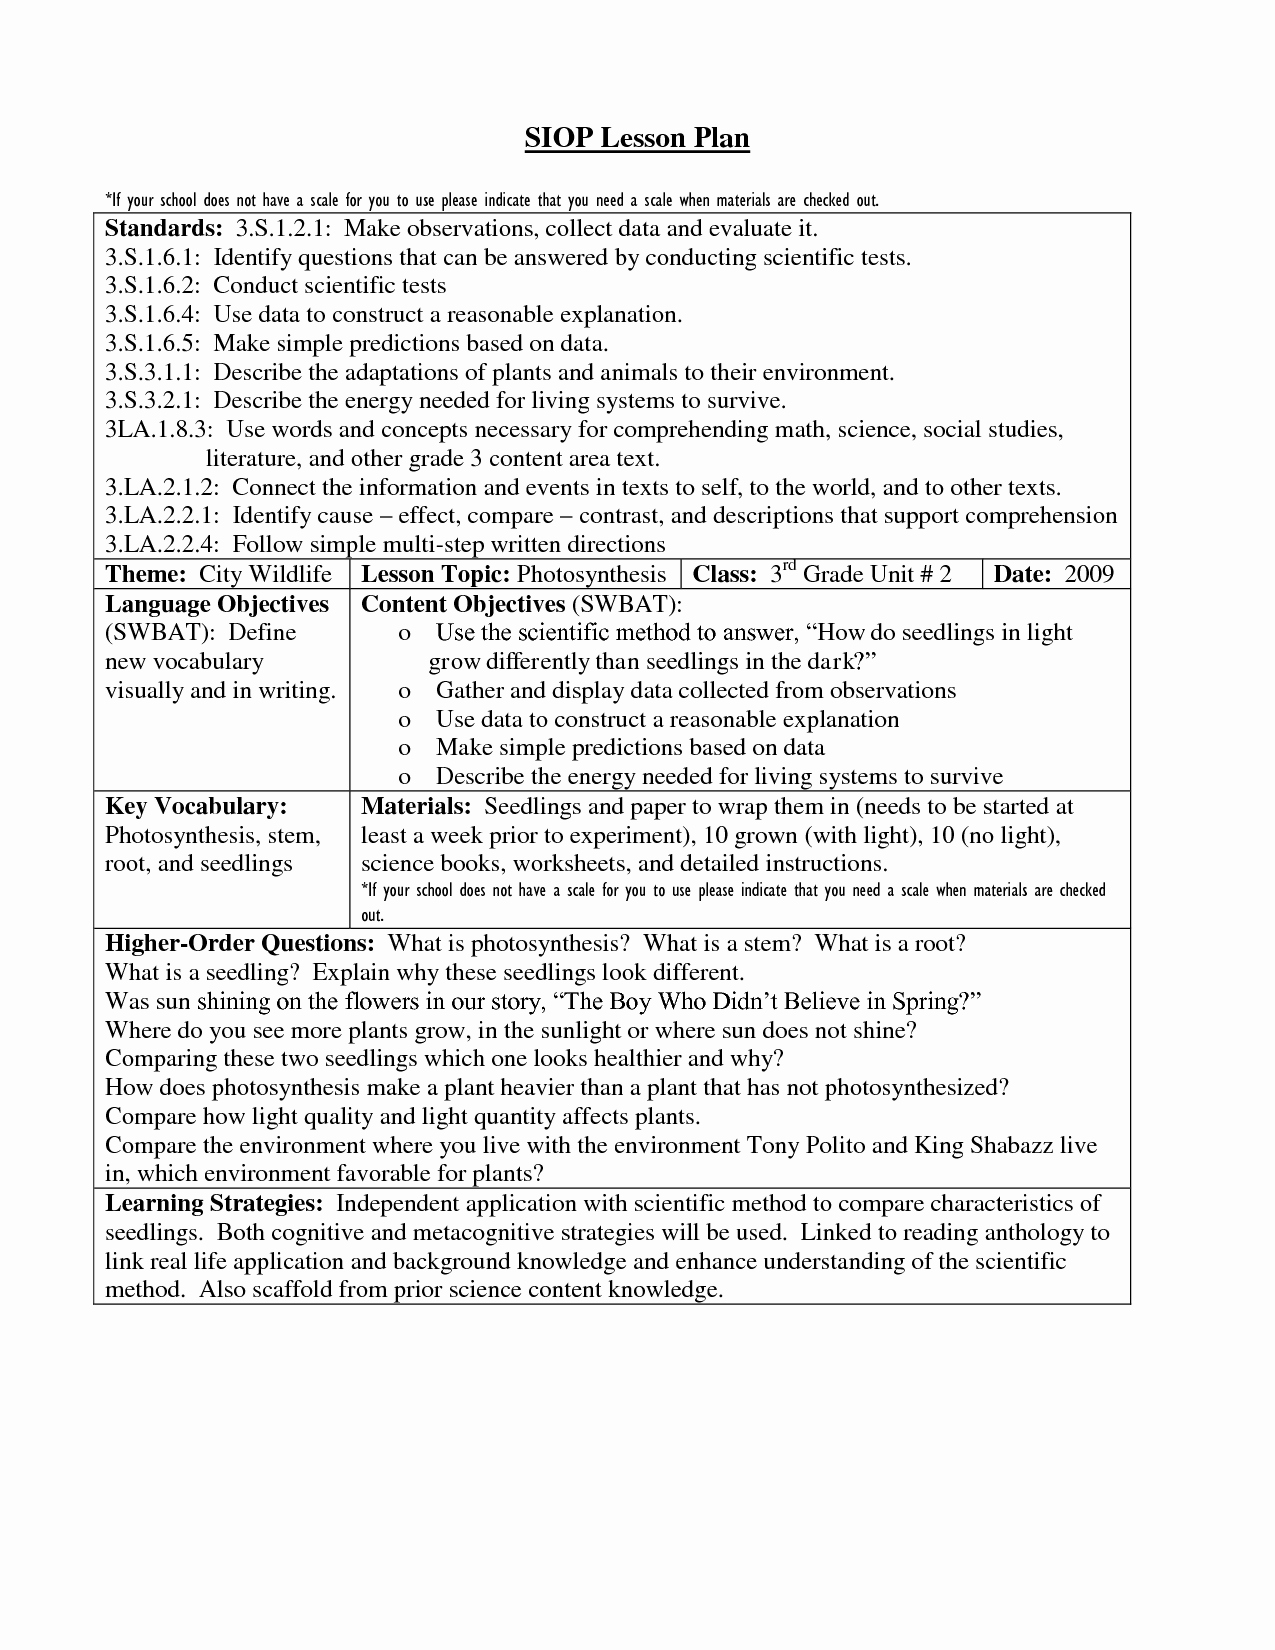 Wida Lesson Plan Template Best Of 16 Awesome Siop Lesson Plan Template 2 Example